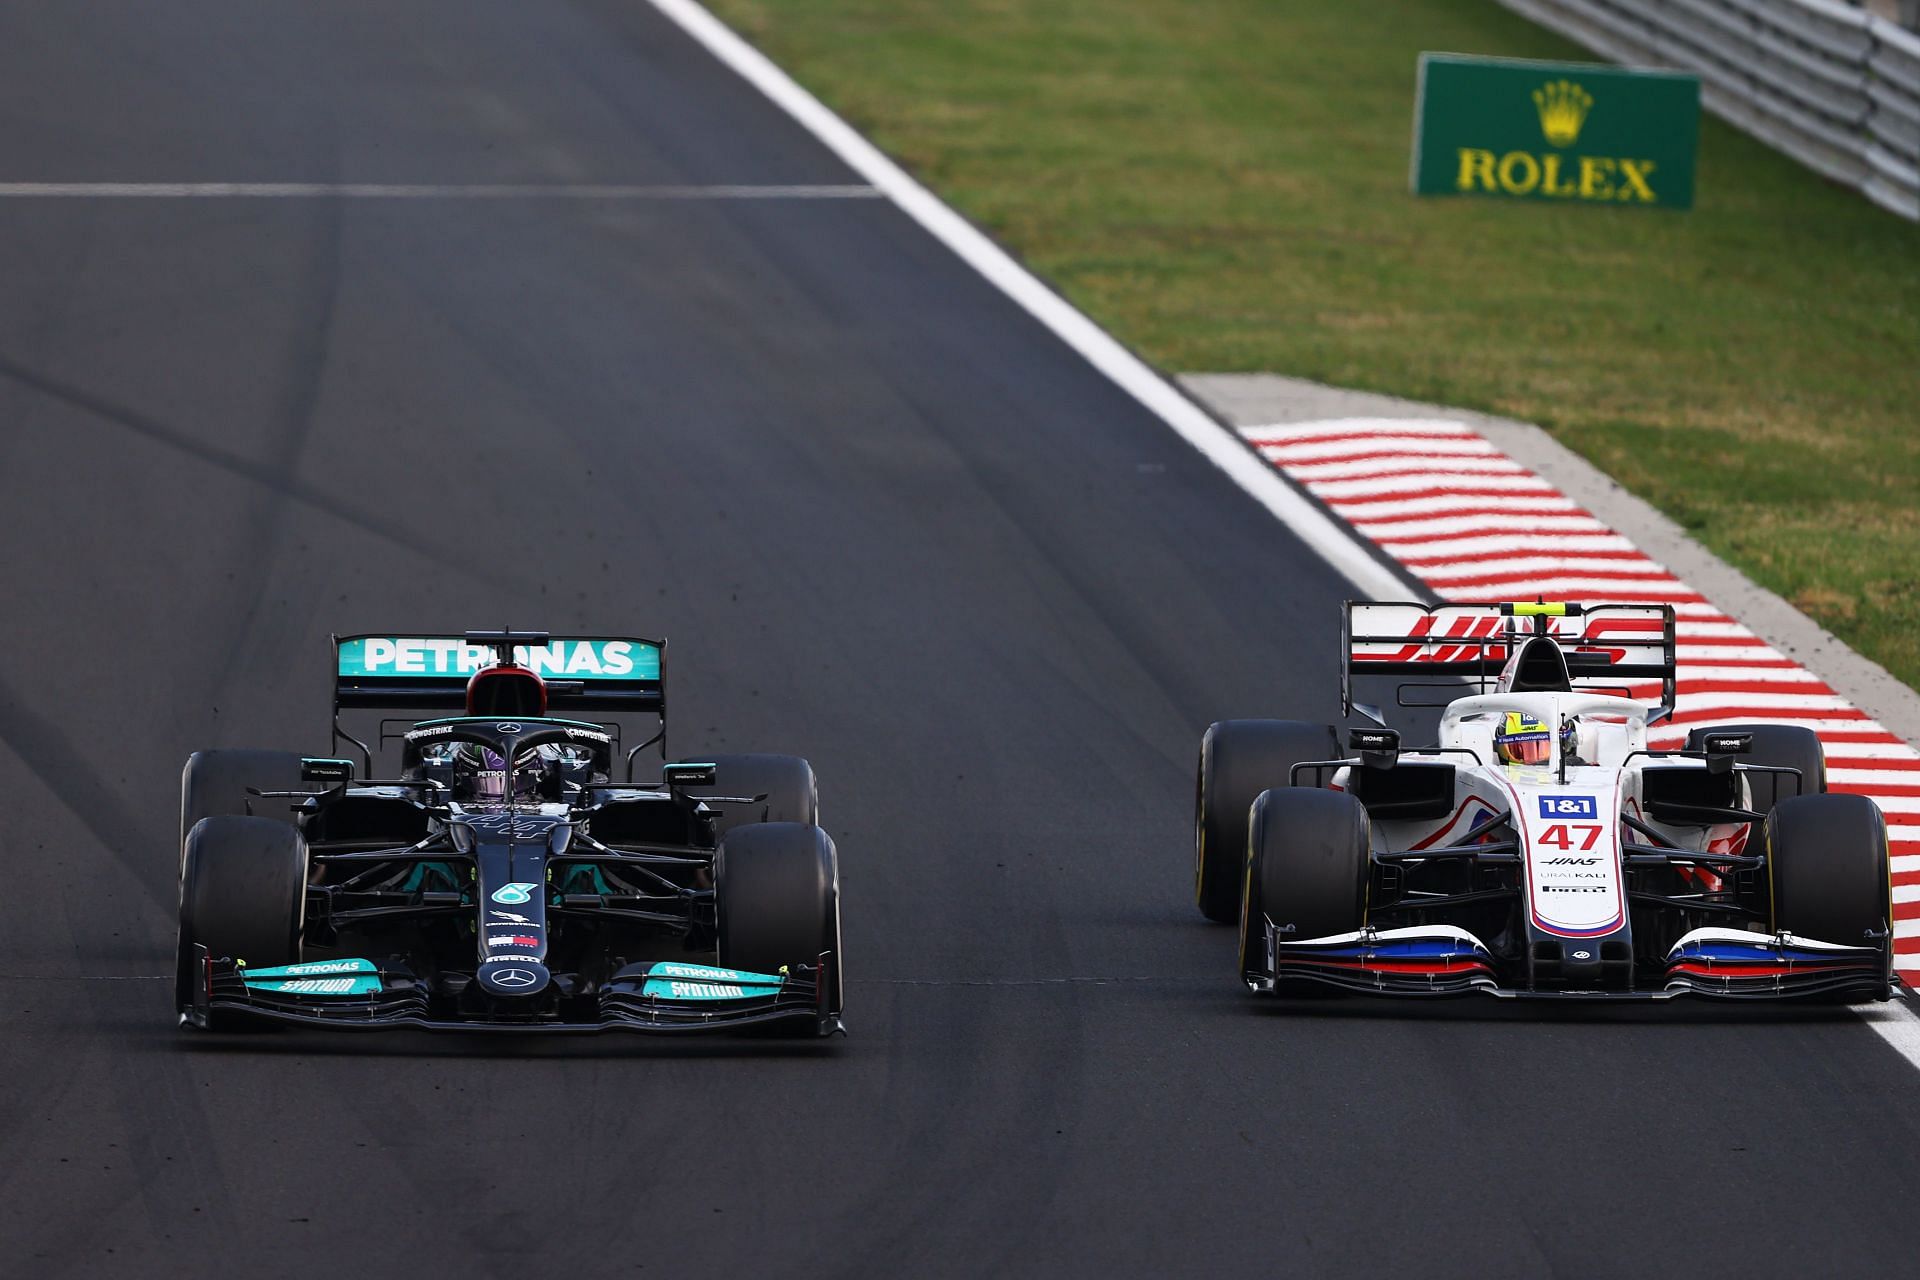 Lewis Hamilton (#44) in his Mercedes W13 overtakes Mick Schumacher (#47) in the Haas VF-21 at the 2021 Hungarian Grand Prix